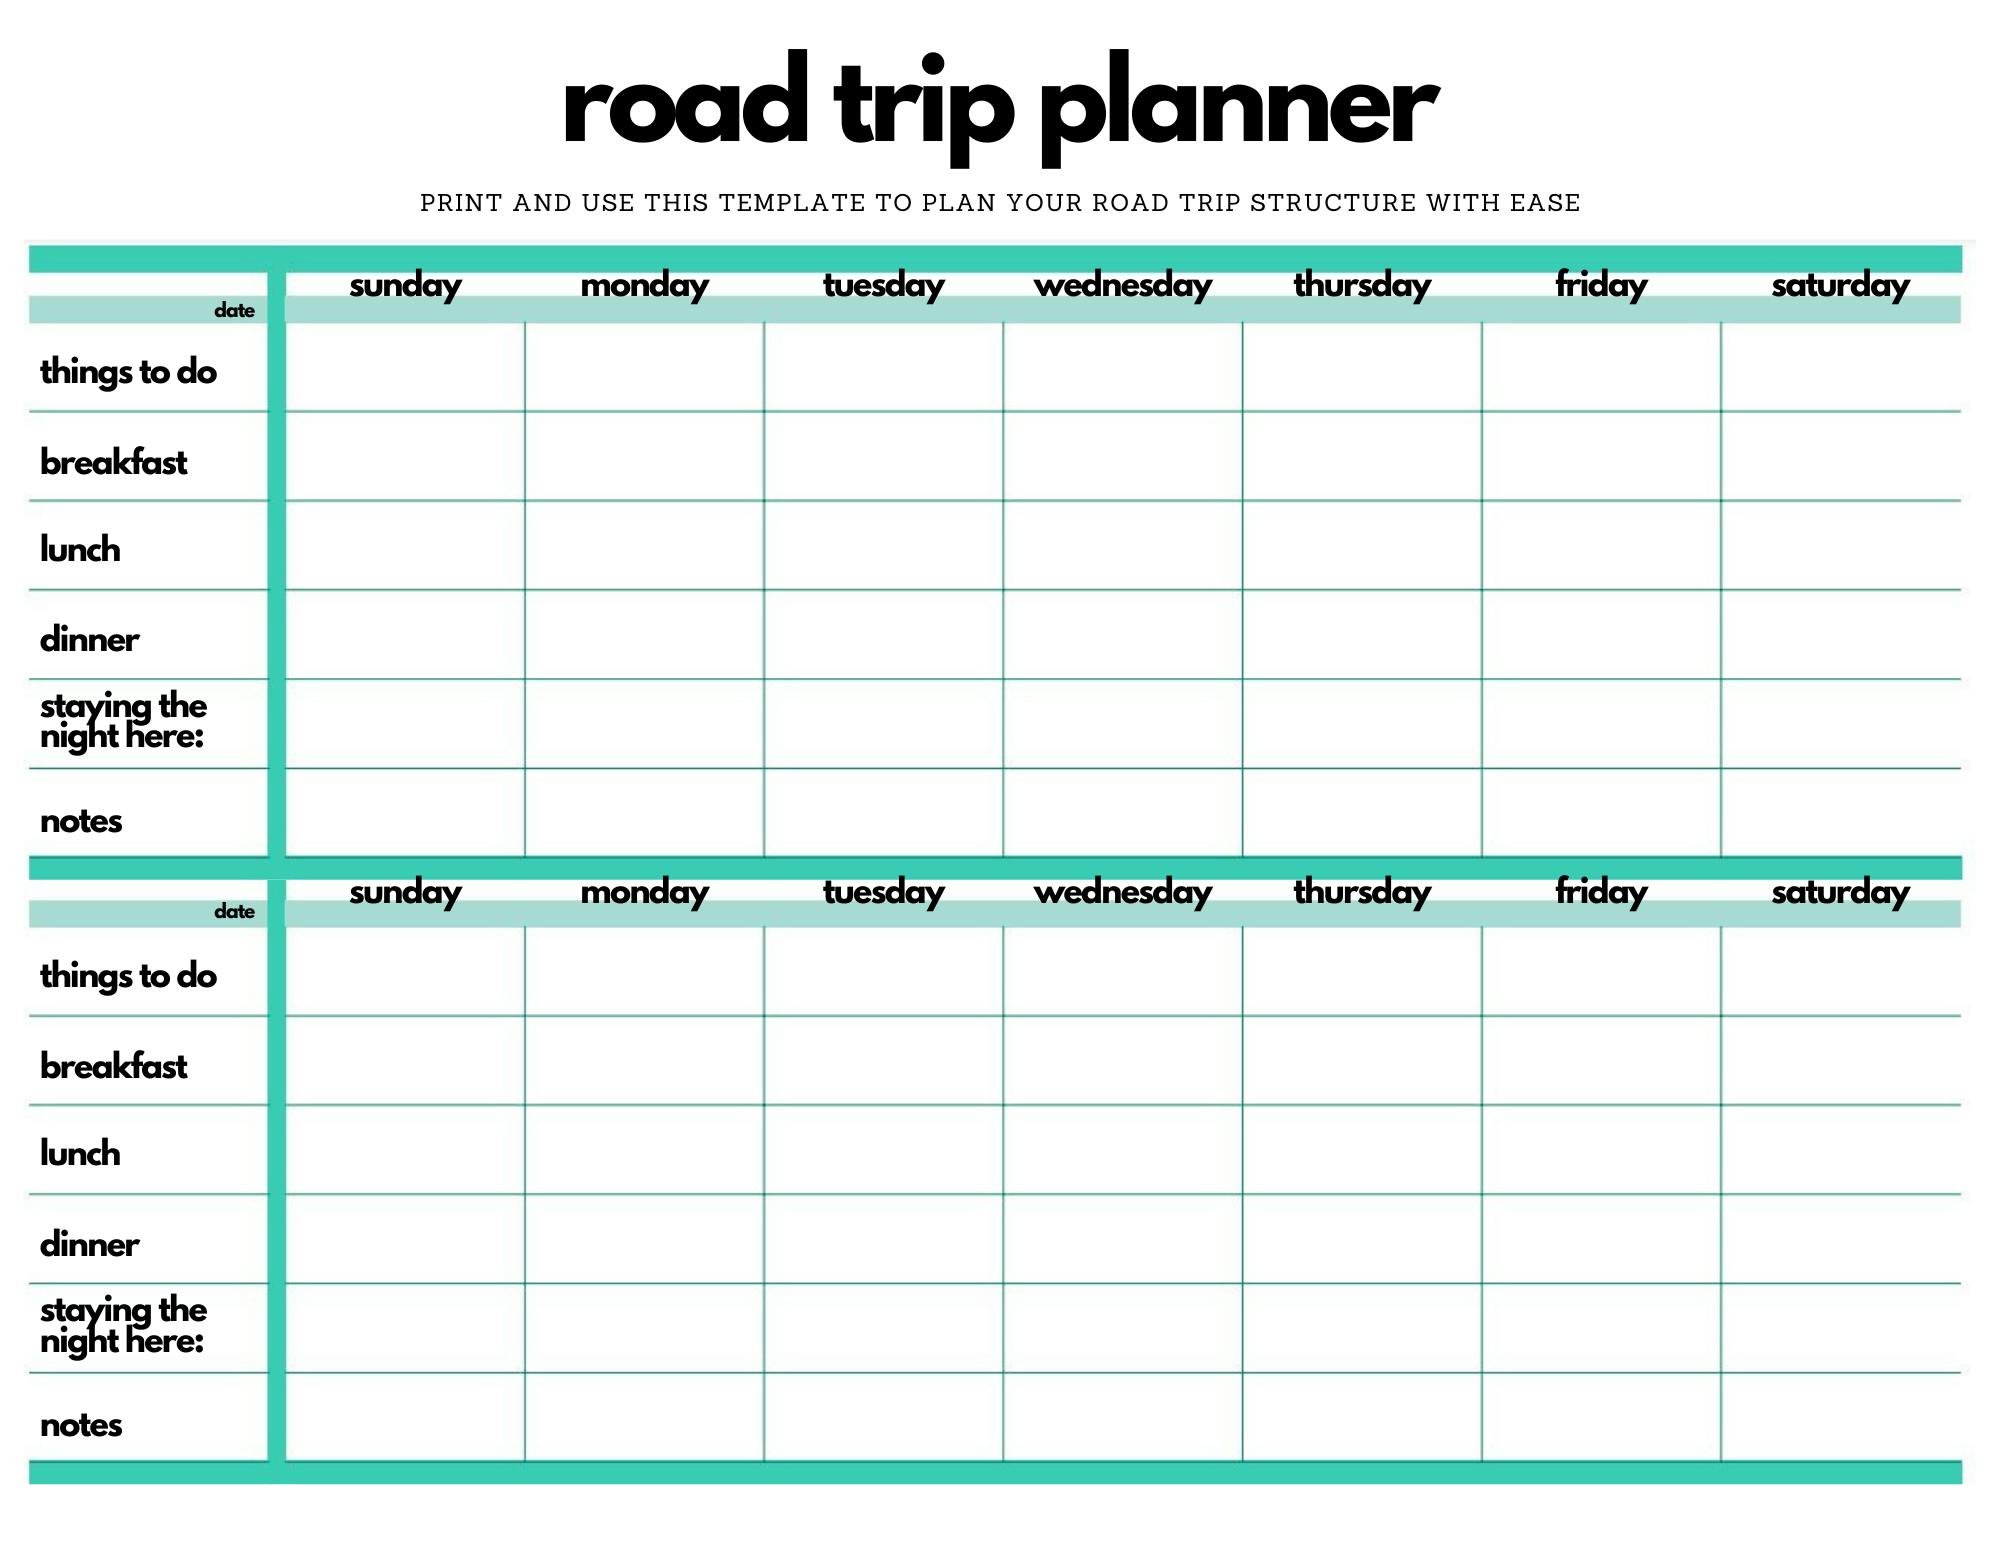 road trip planner cost